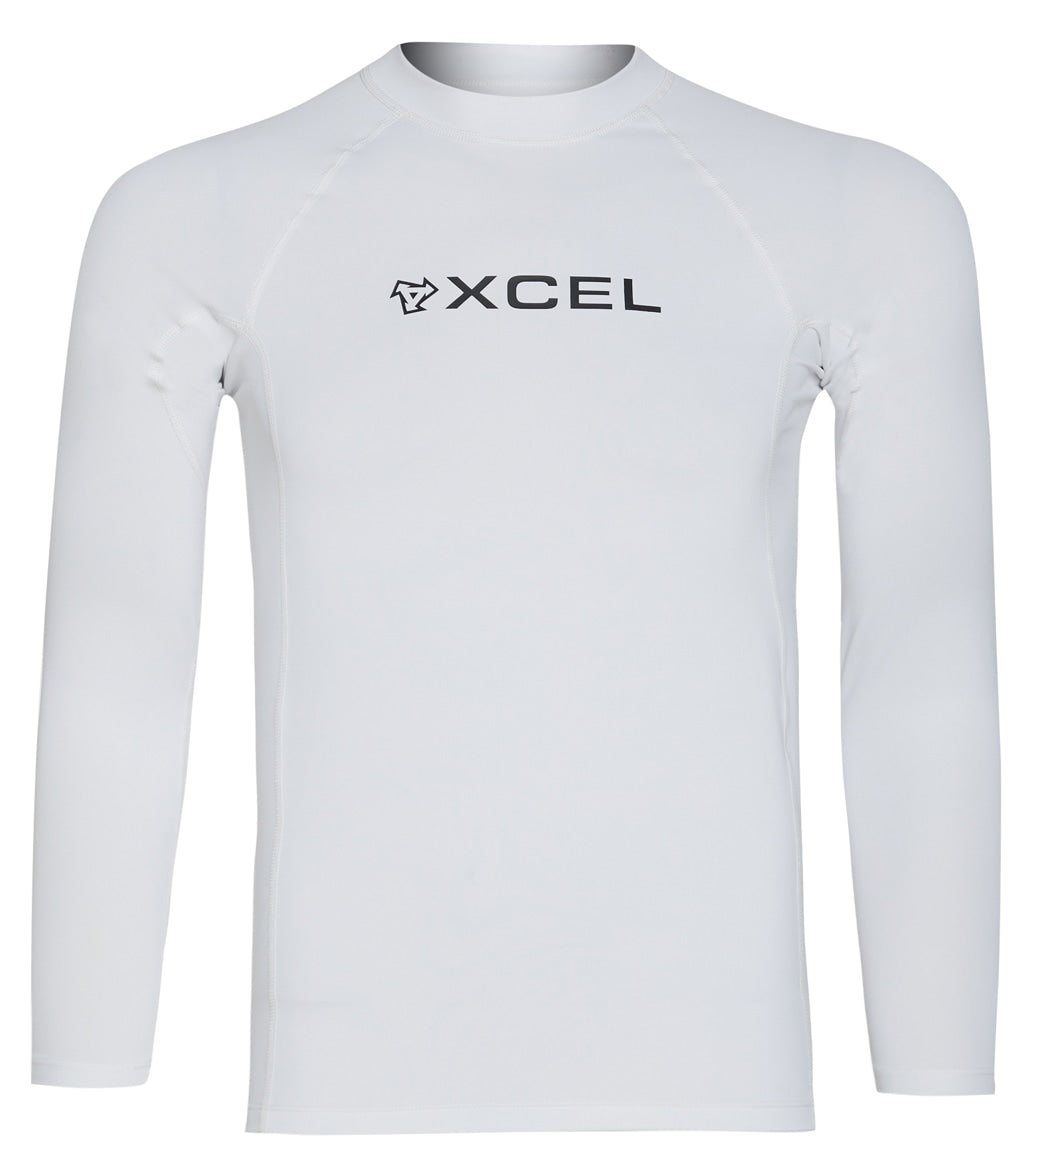 A white long-sleeve rash guard by the brand XCEL. The focus is on the design, fit, and brand logo prominently featured on the front of the garment.